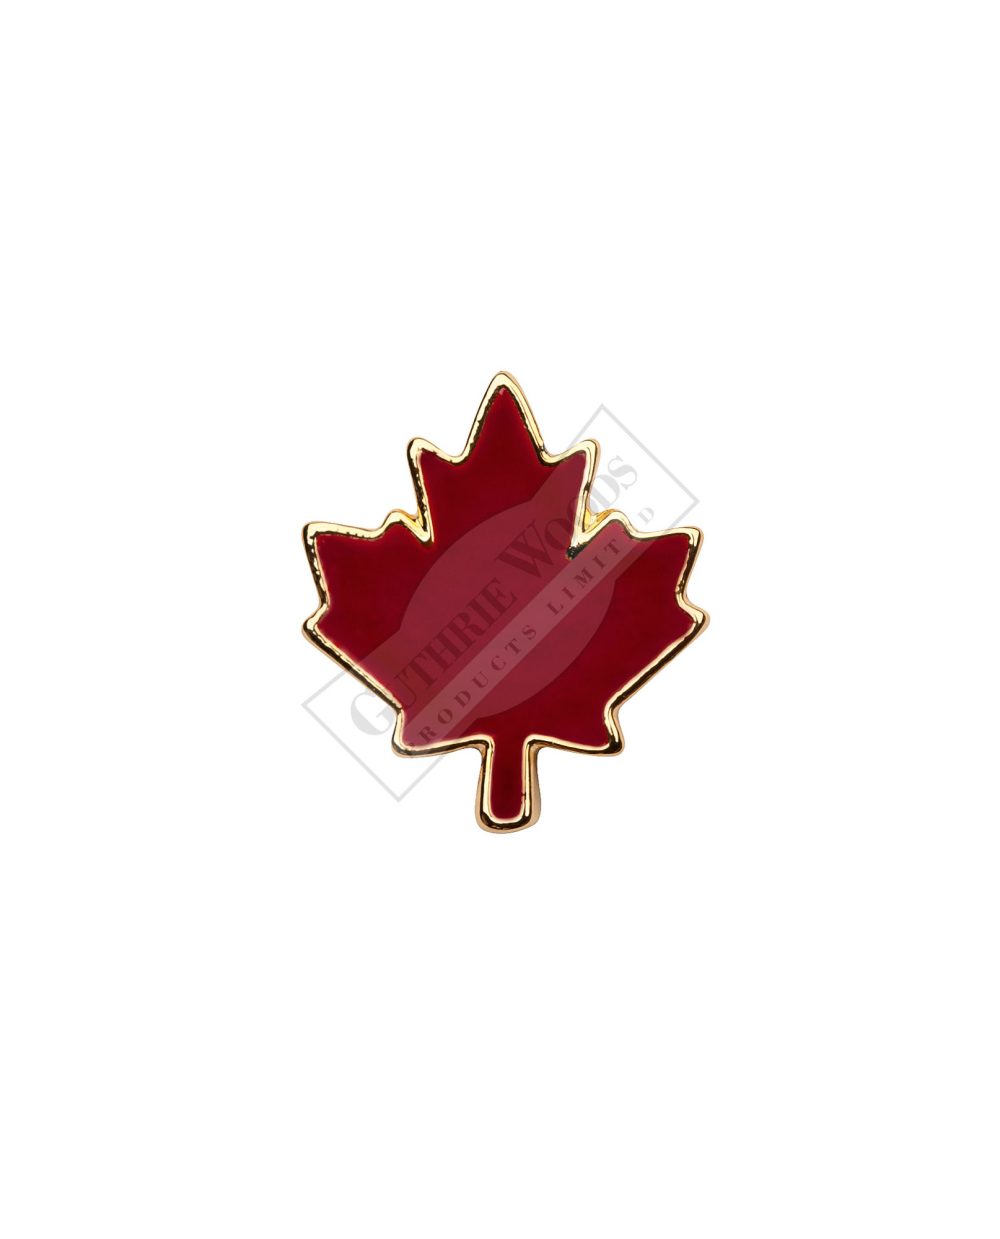 Red Maple Leaf - Undress Ribbon Devices #247-R